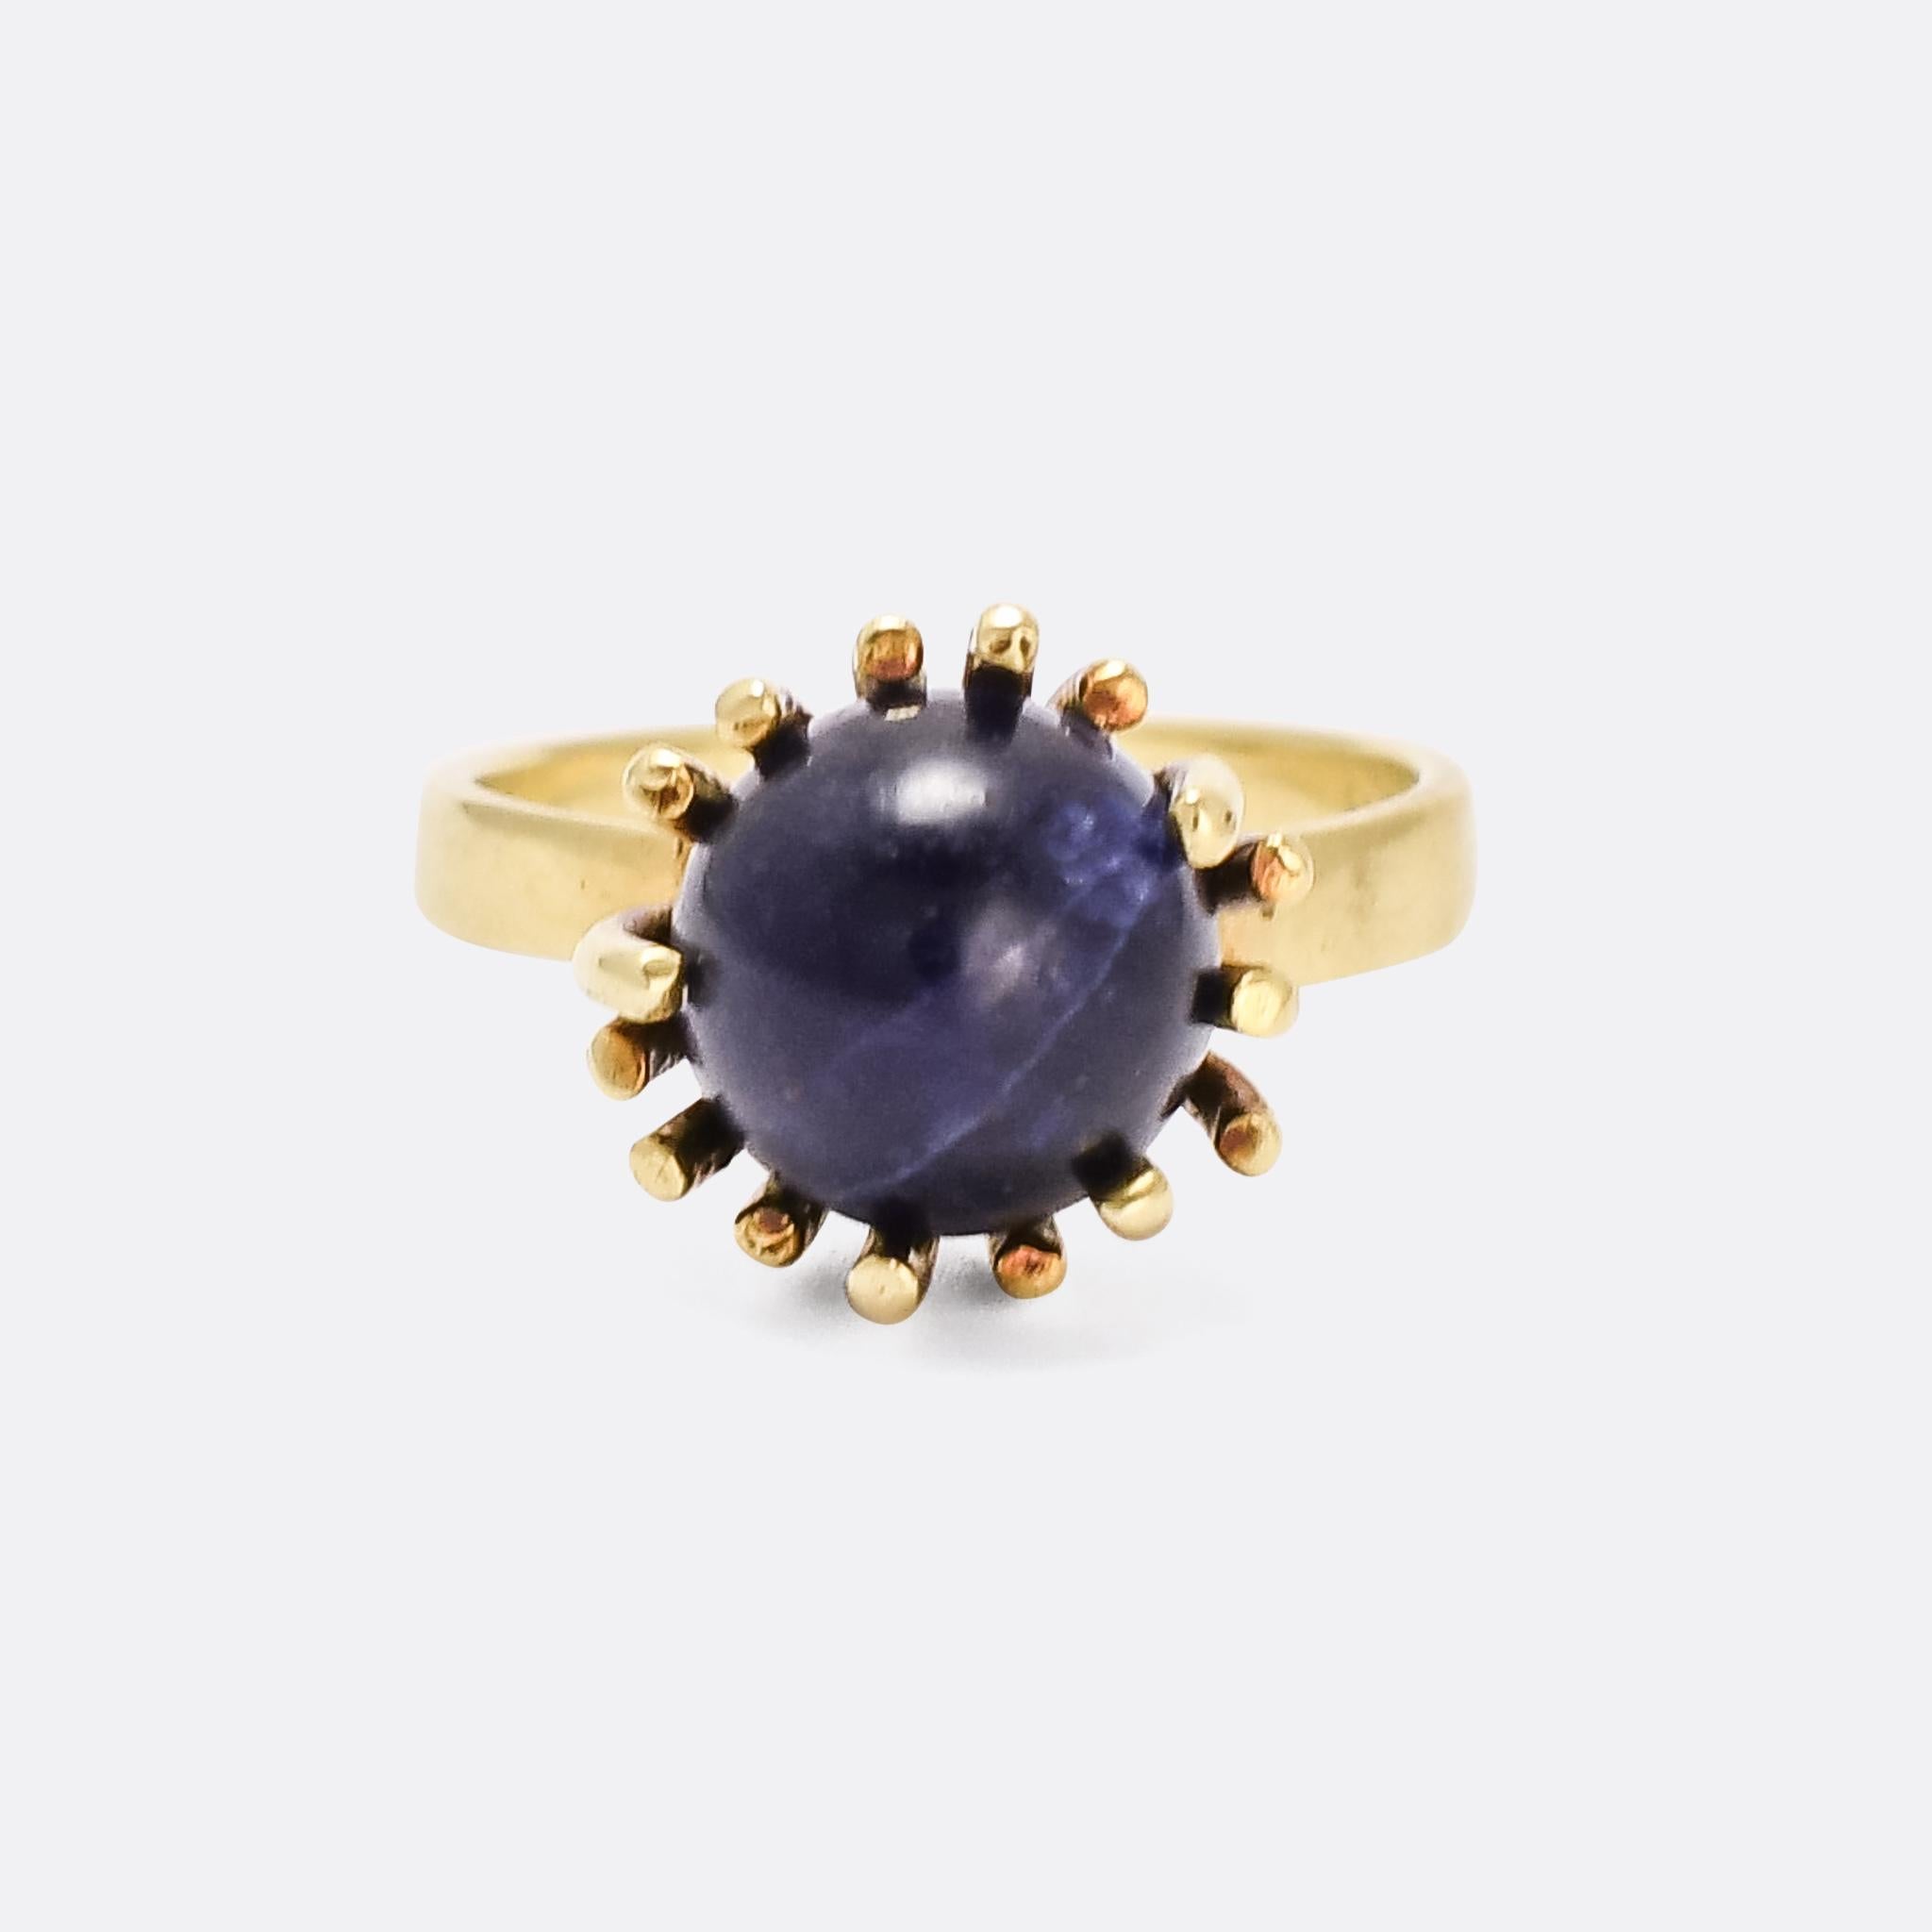 A cool 1970s solitaire ring with five interchangeable gemstone orbs. The stones can be swapped in and out by way of a clever mechanism: squeezing the shoulders together moves one of the prongs out, falling back in place when worn to secure the